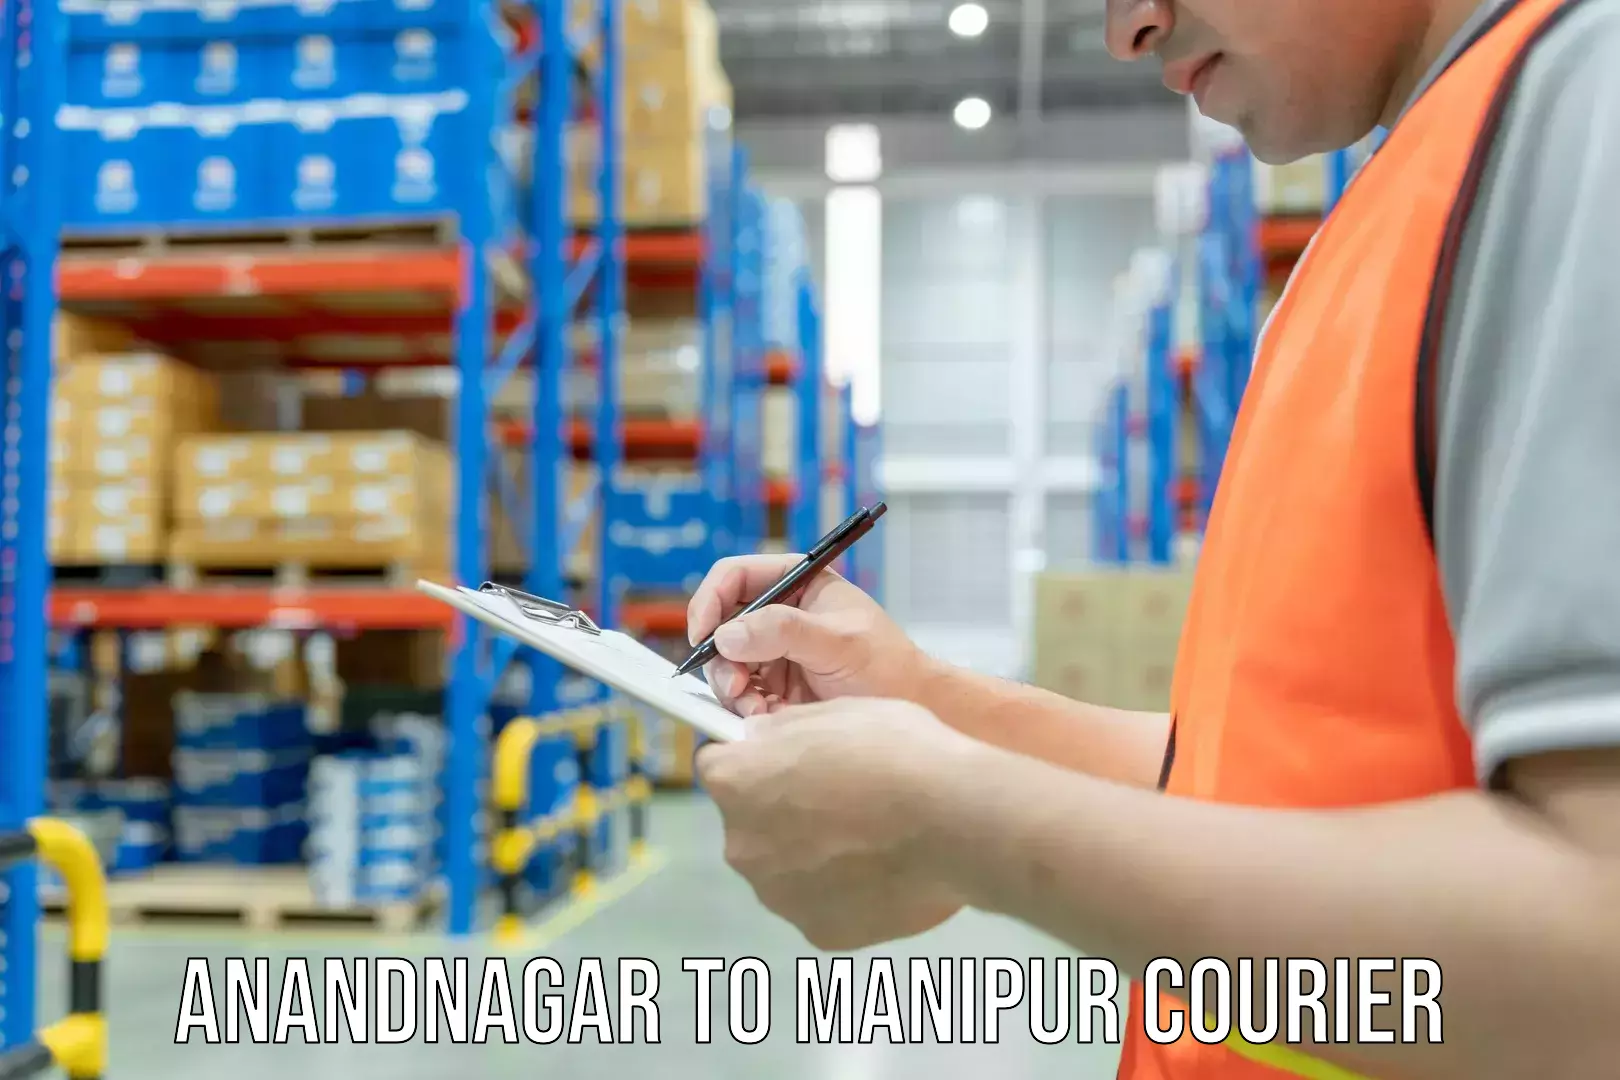 Delivery service partnership Anandnagar to Manipur